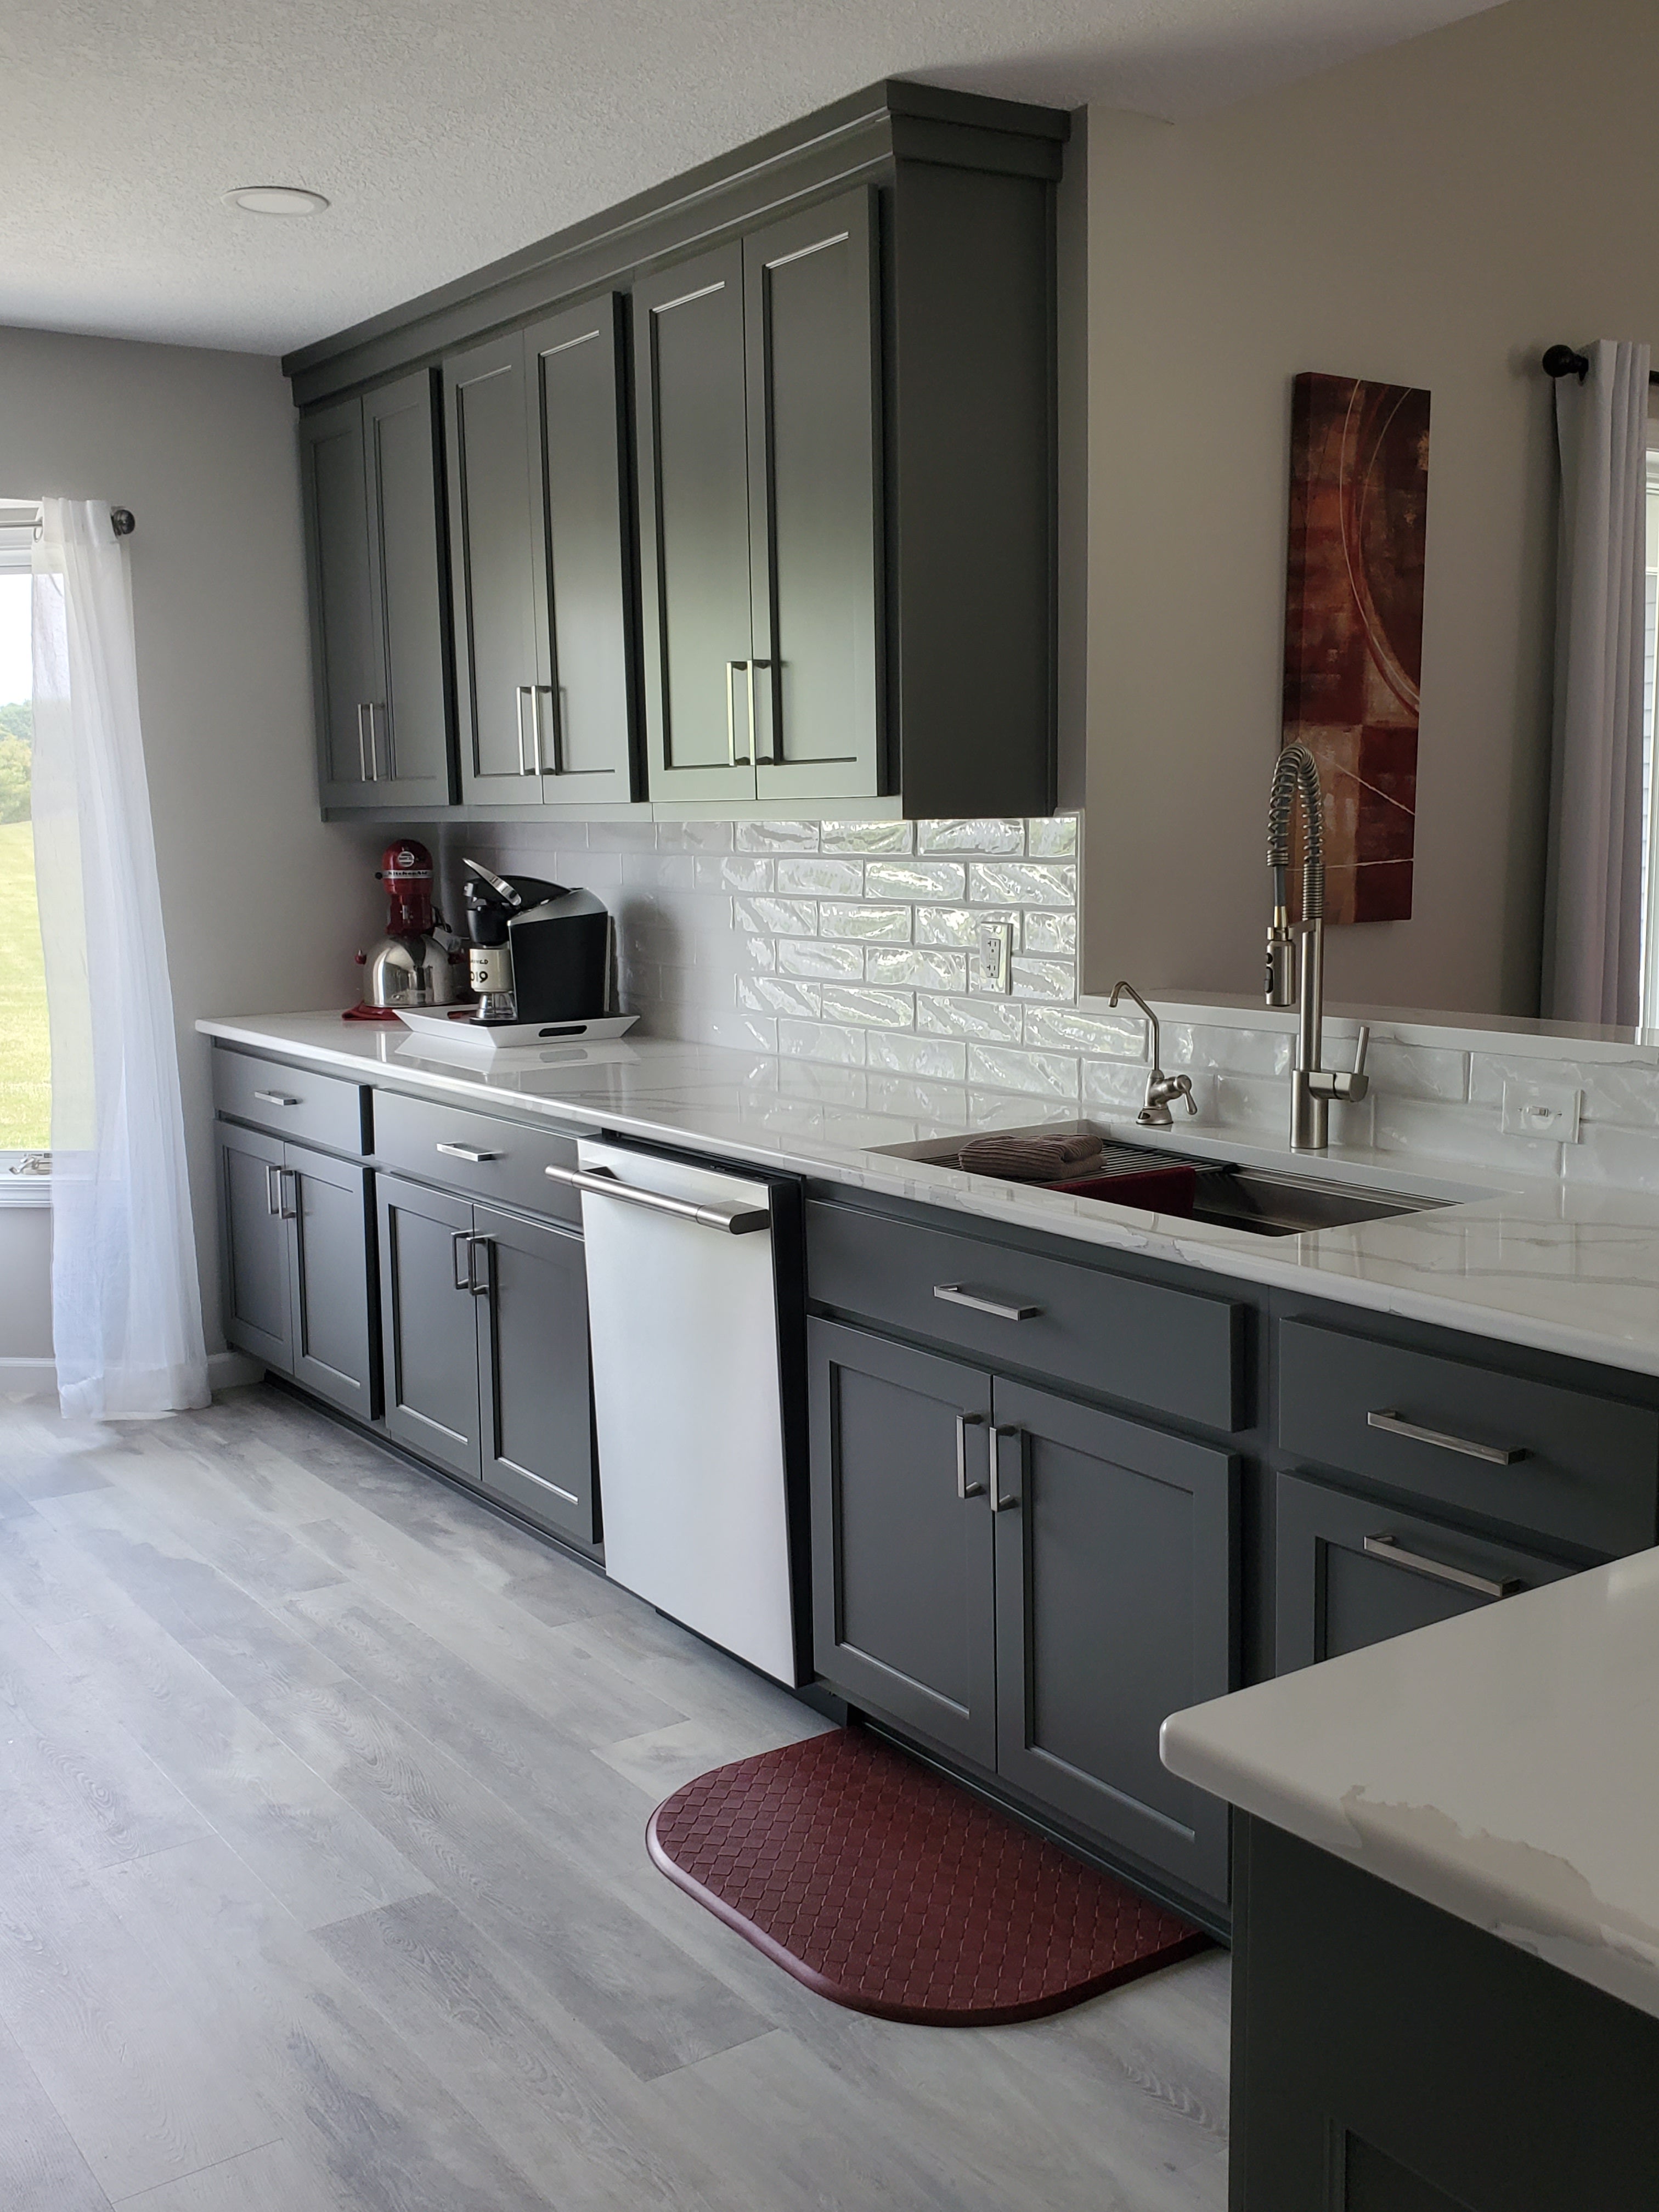 gray upper and lower kitchen cabinets.jpg